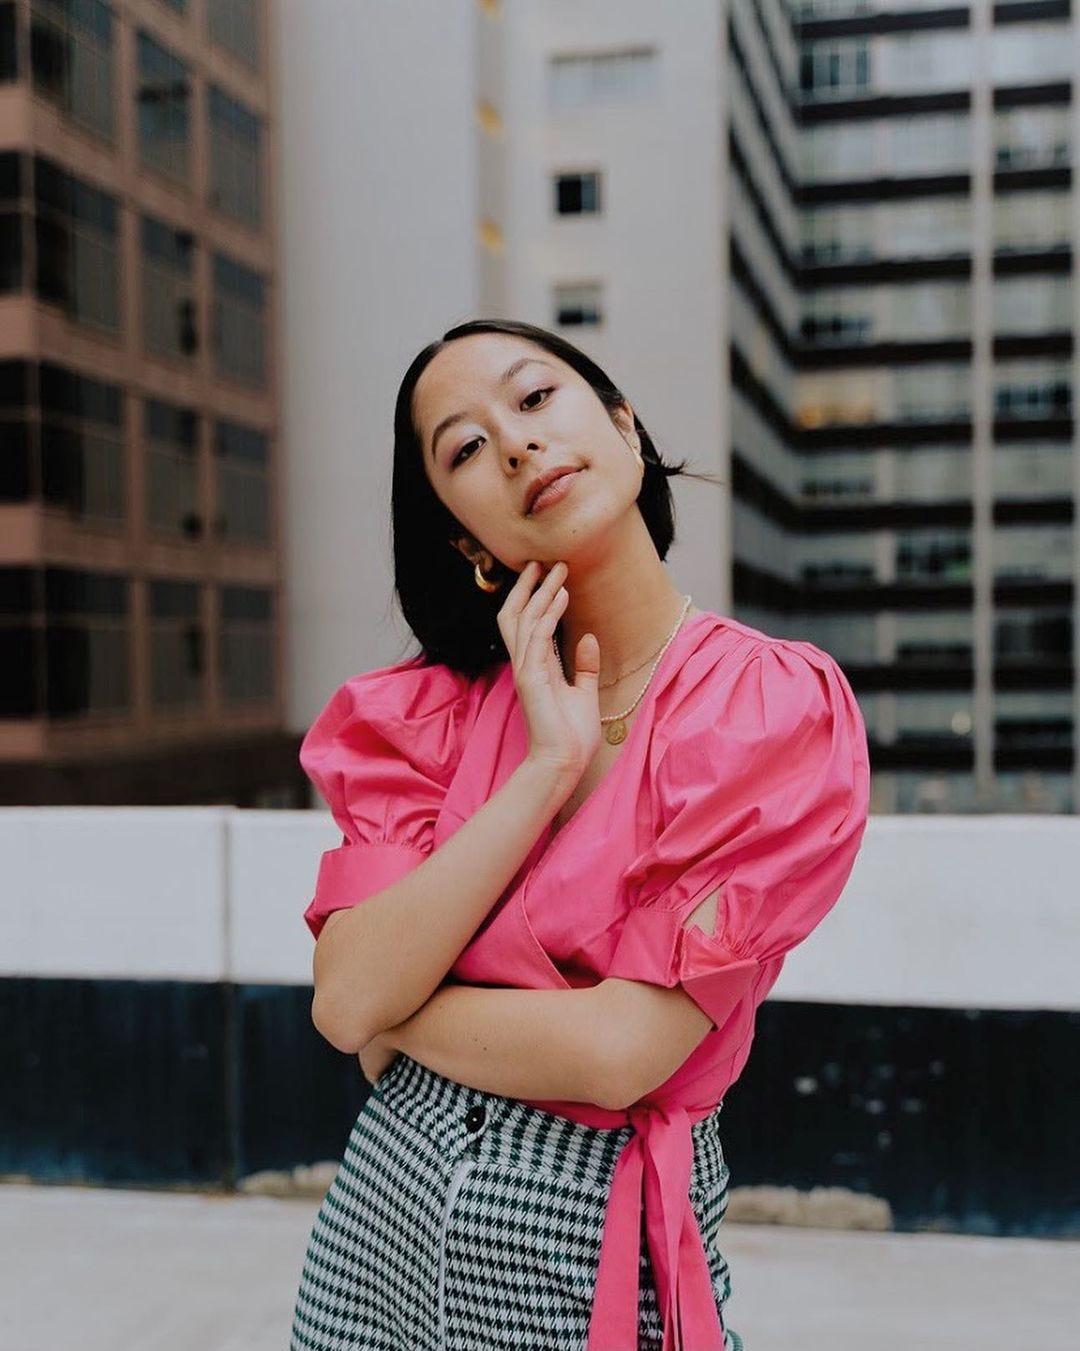 A young Asian Australian woman, standing on a rooftop in front of city buildings, posing with her hand on her chin and wearing a bright pink blouse